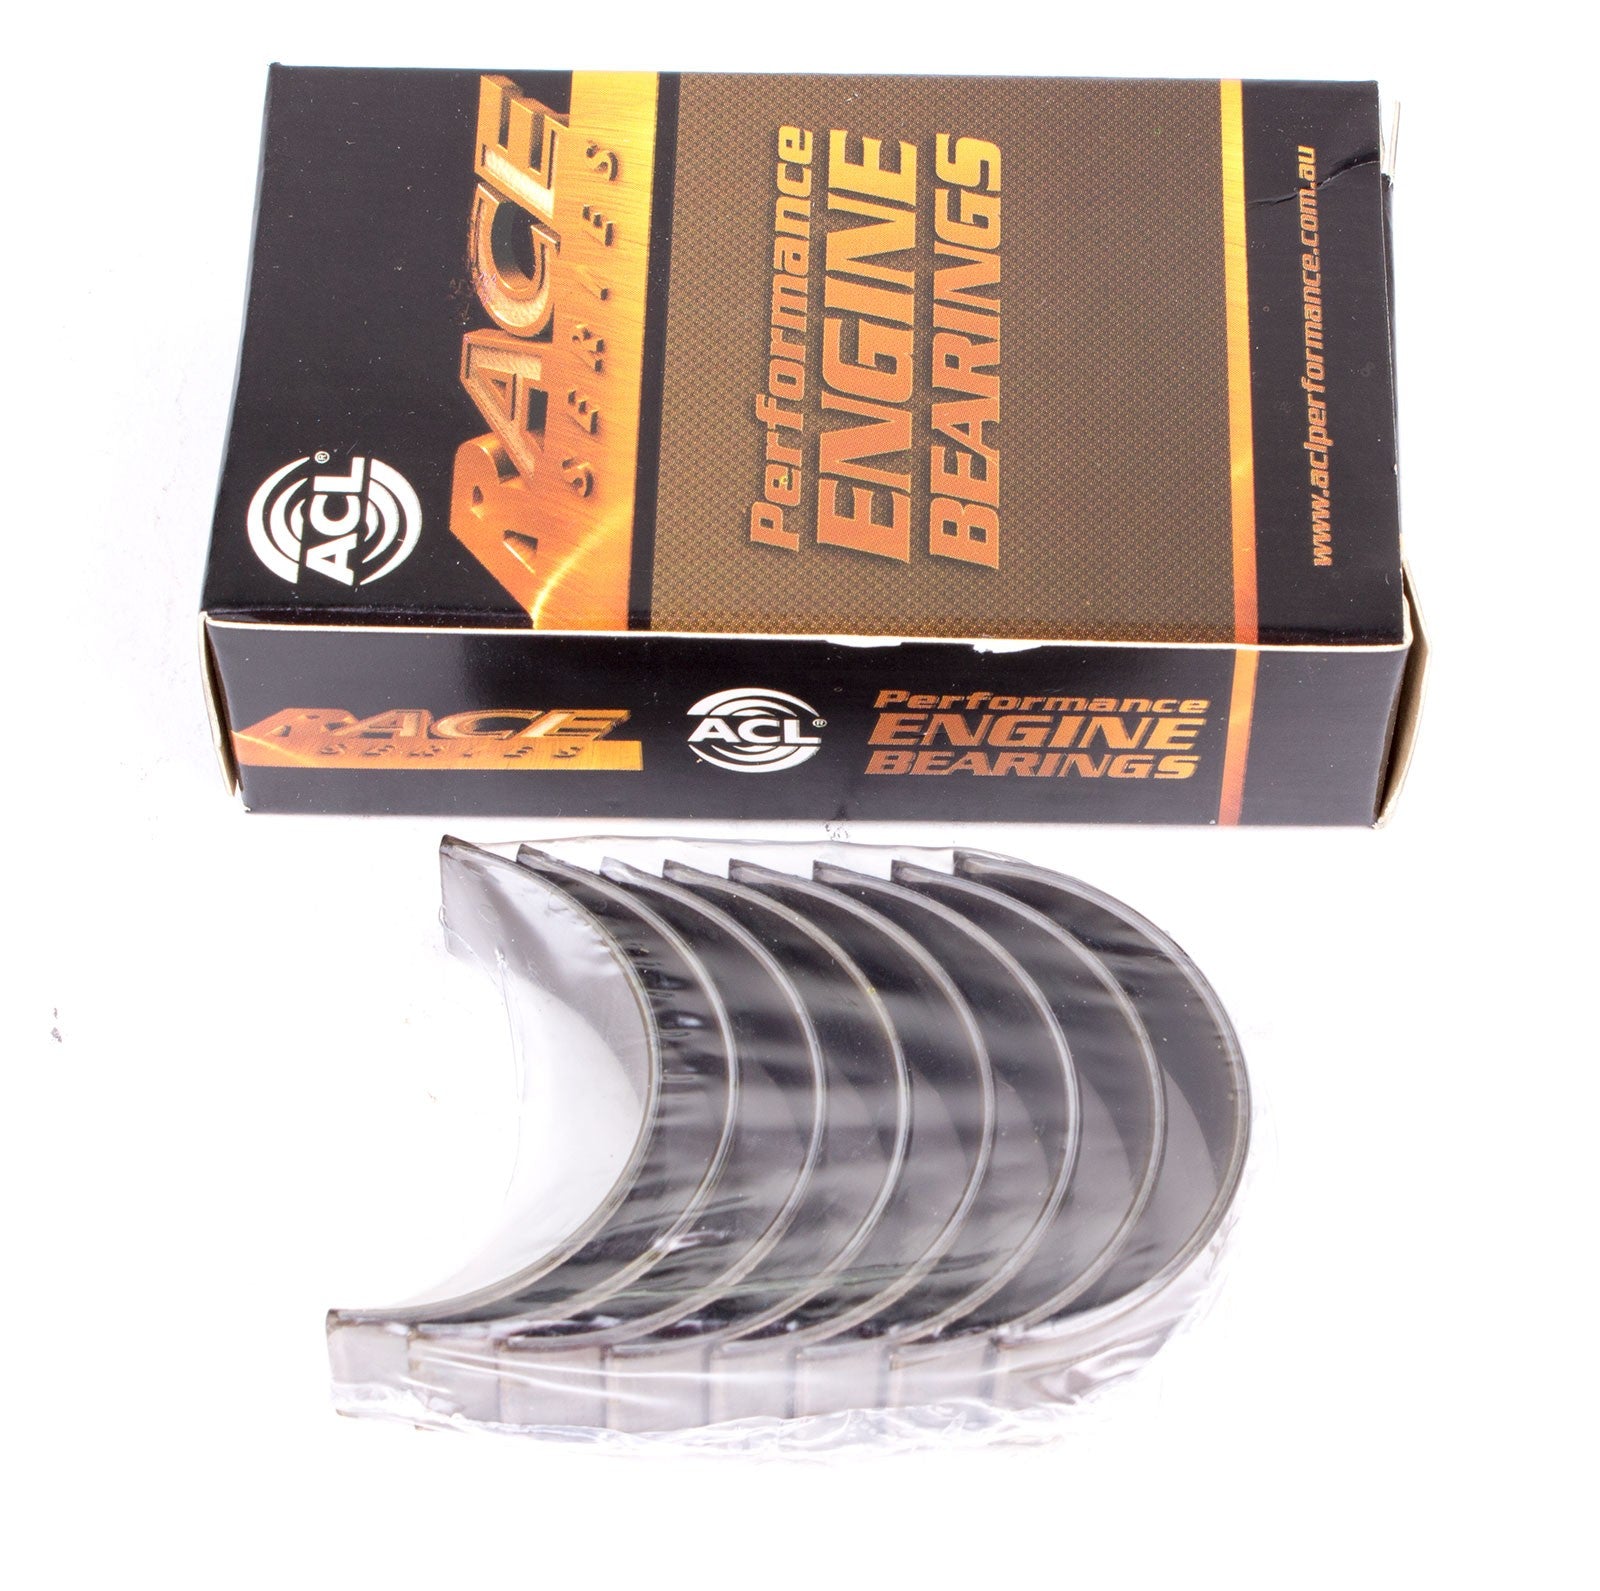 ACL 5M909H-020 Main bearing set (ACL Race Series) Photo-0 